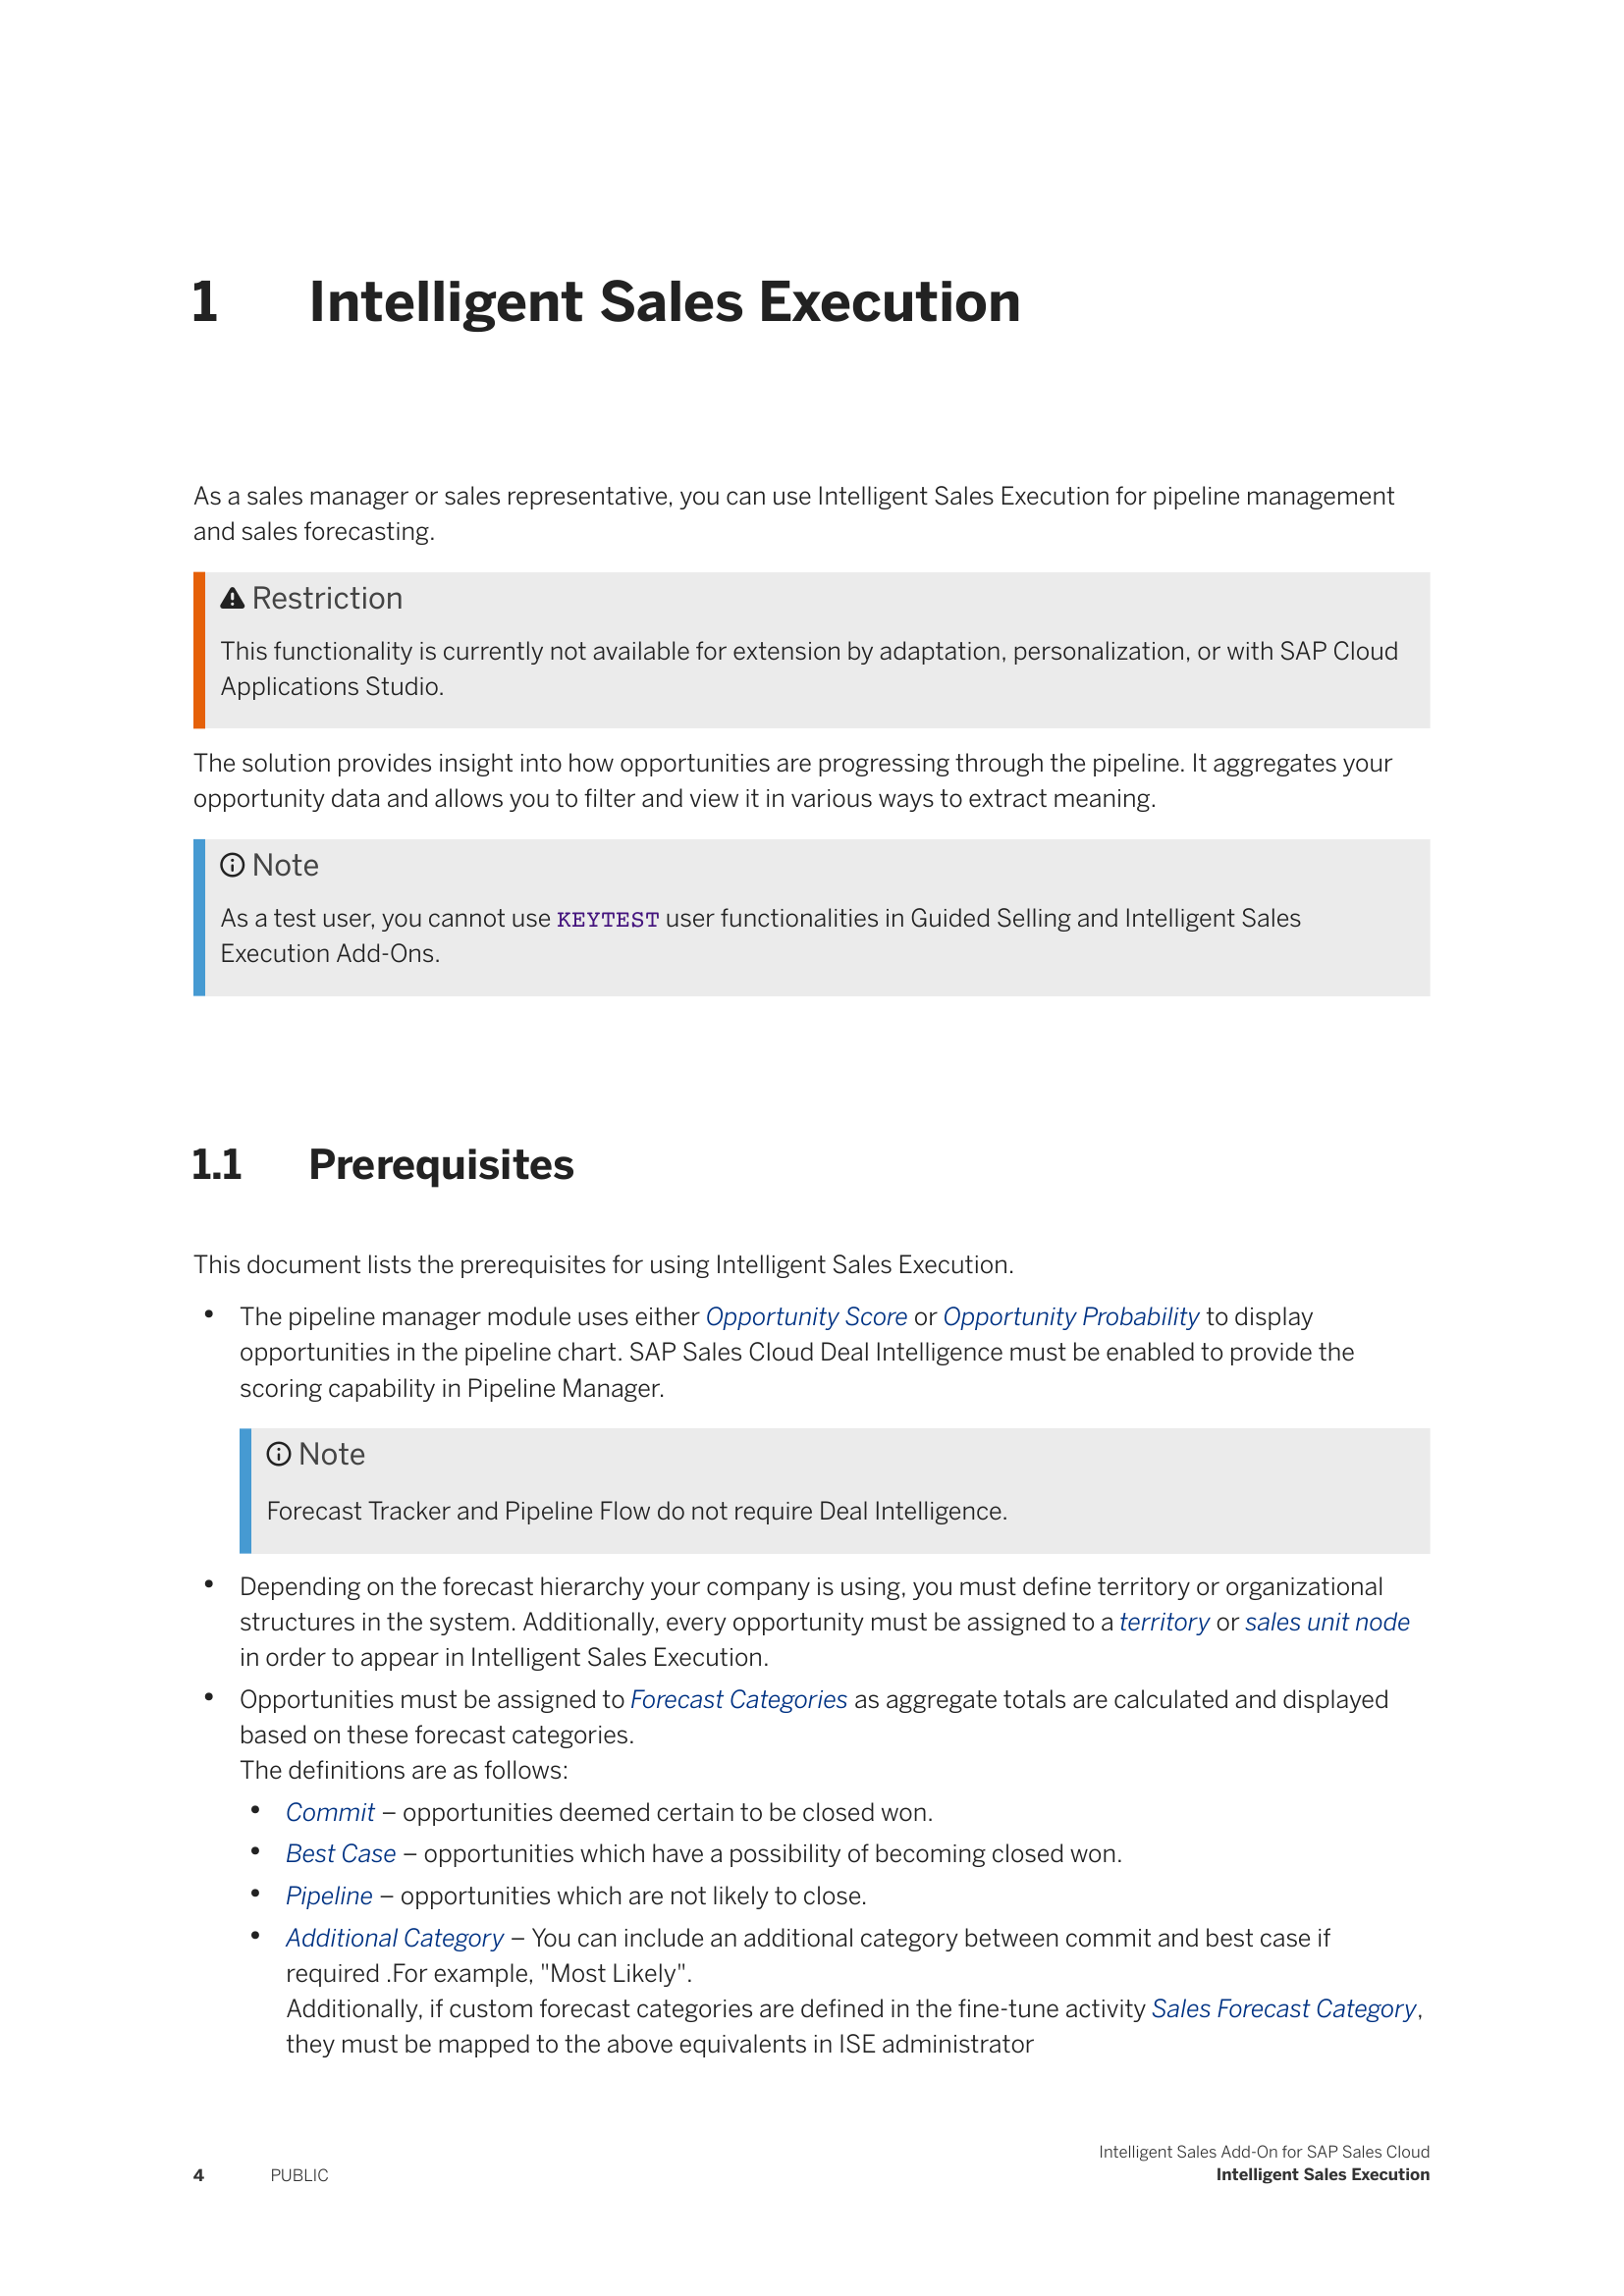 A page of text with headers, subheaders, lists, and sublists. Each is highlighted by a different color based on the type of content block available